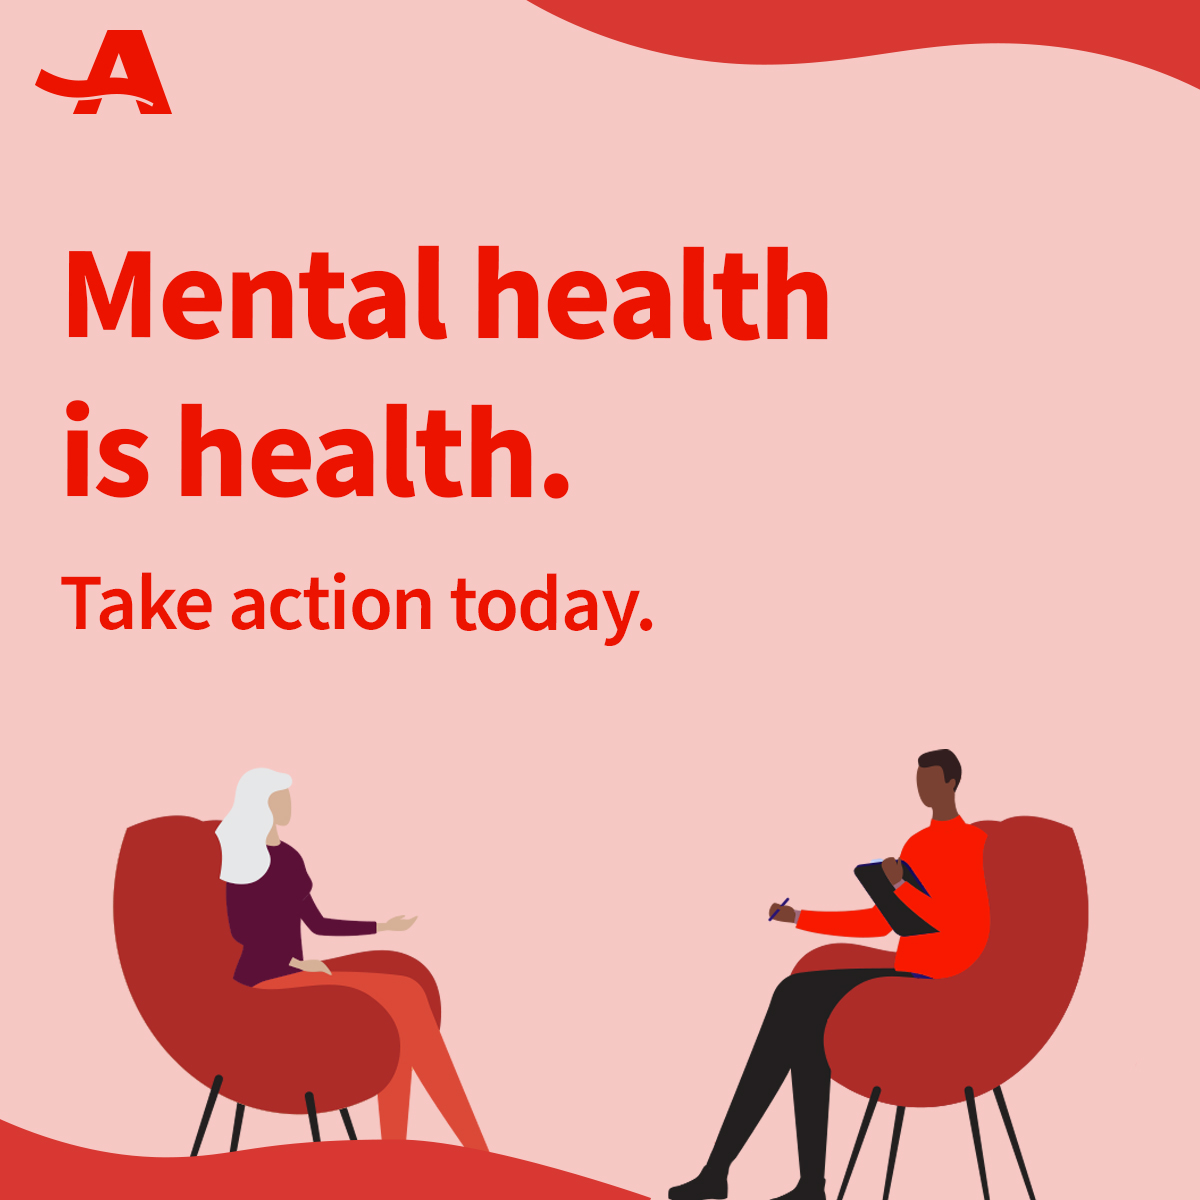 Today is Mental Health Action Day. Whether it’s taking a moment for yourself, finding support, or connecting with a friend, how will you take action today? Learn more at: spr.ly/6017z3q4R #MentalHealthActionDay